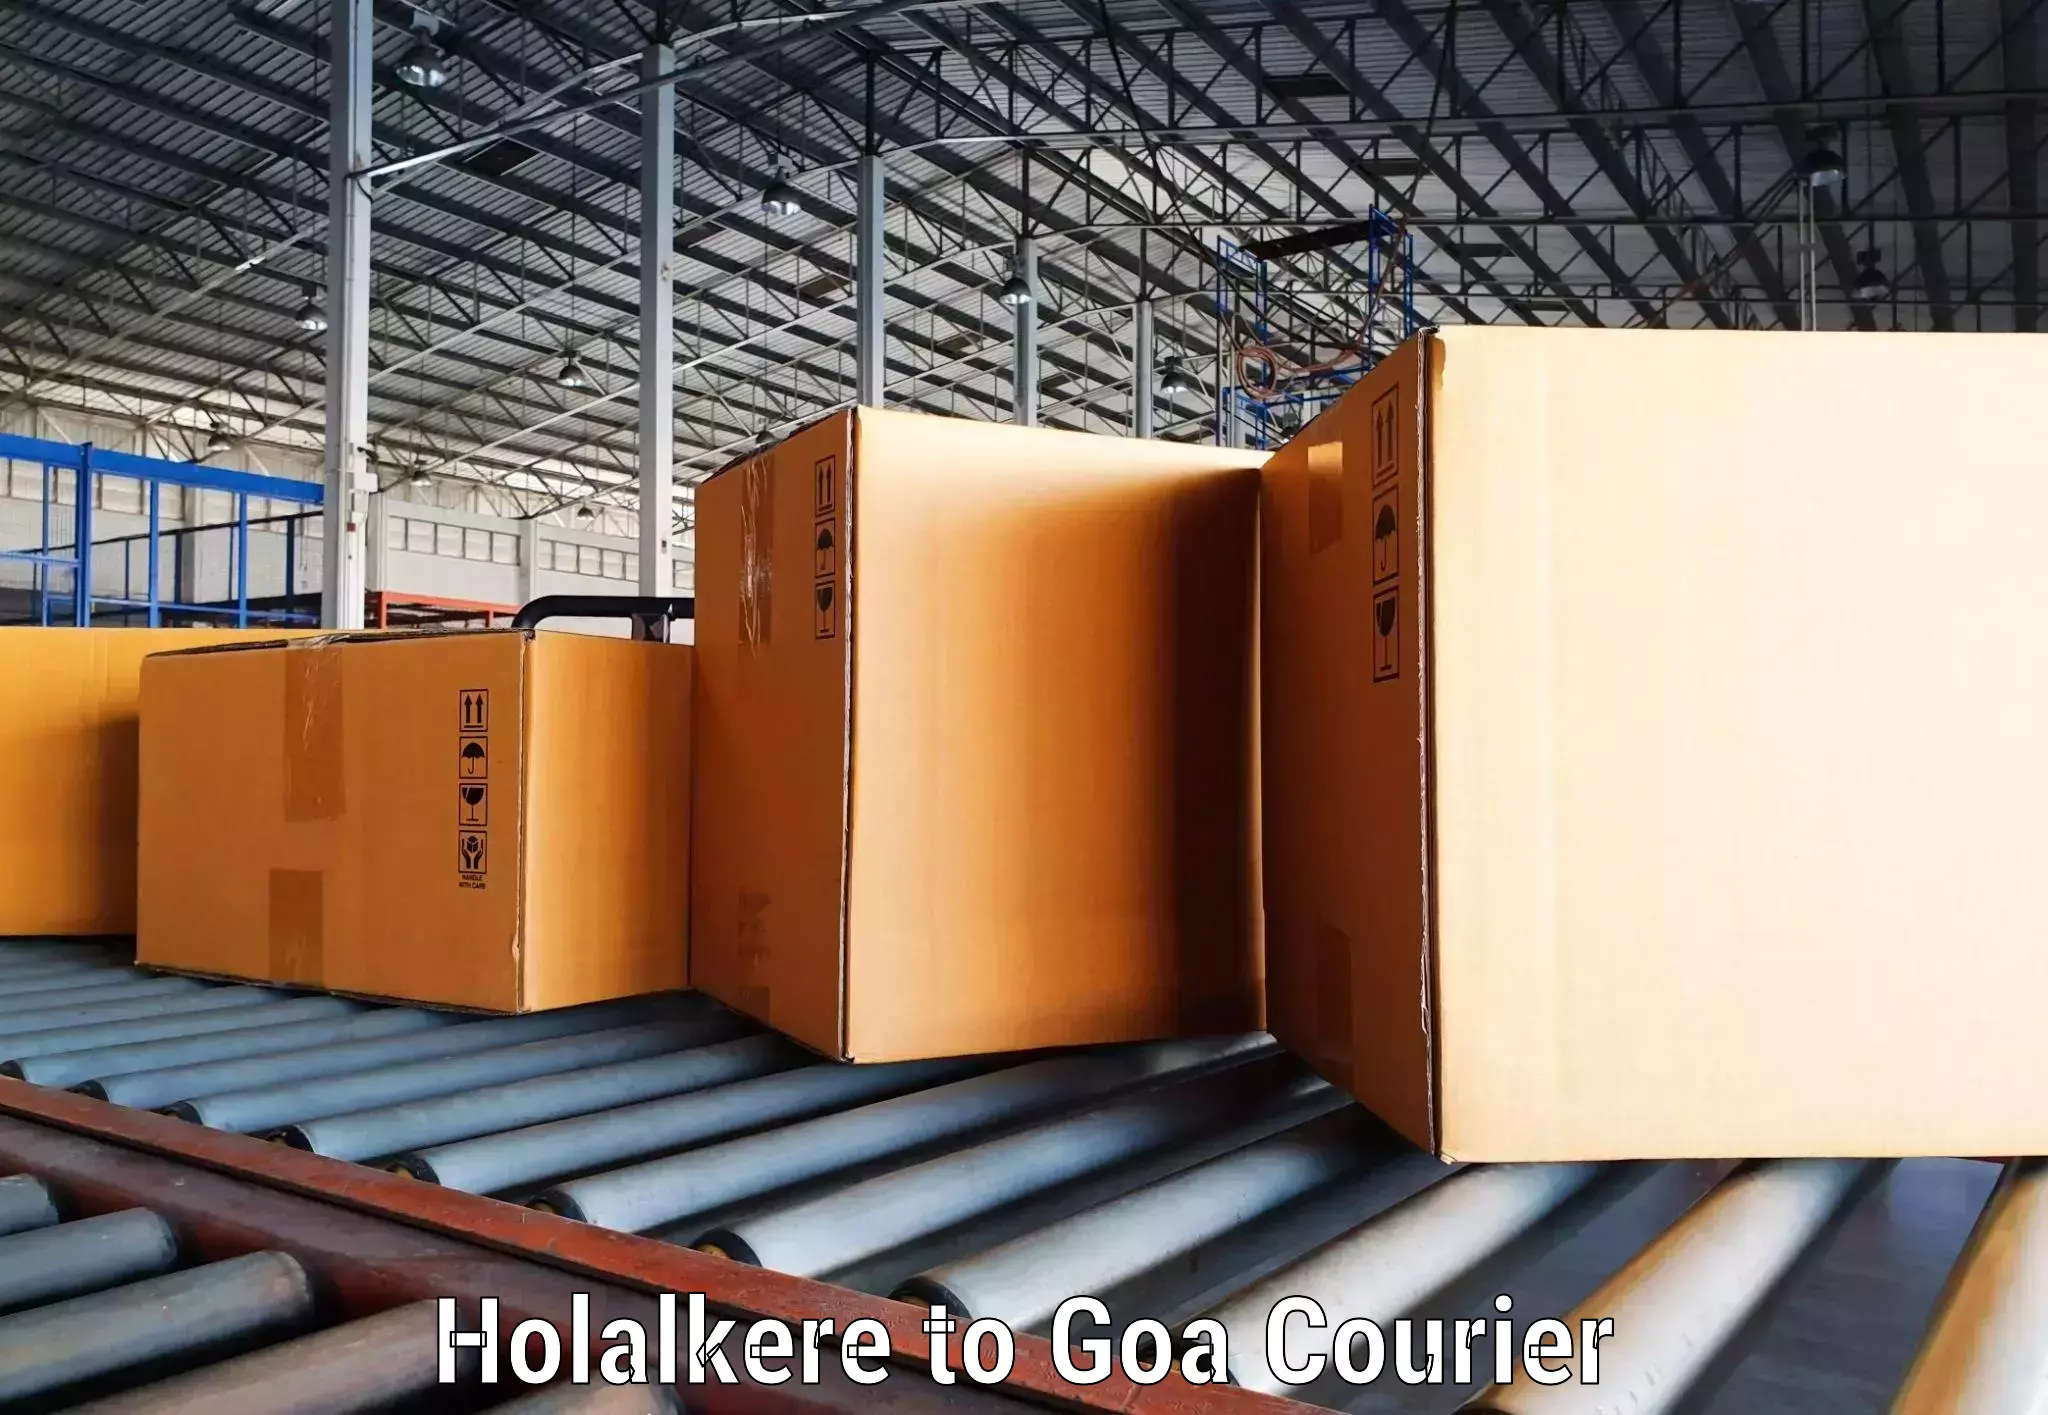 Efficient parcel tracking Holalkere to Goa